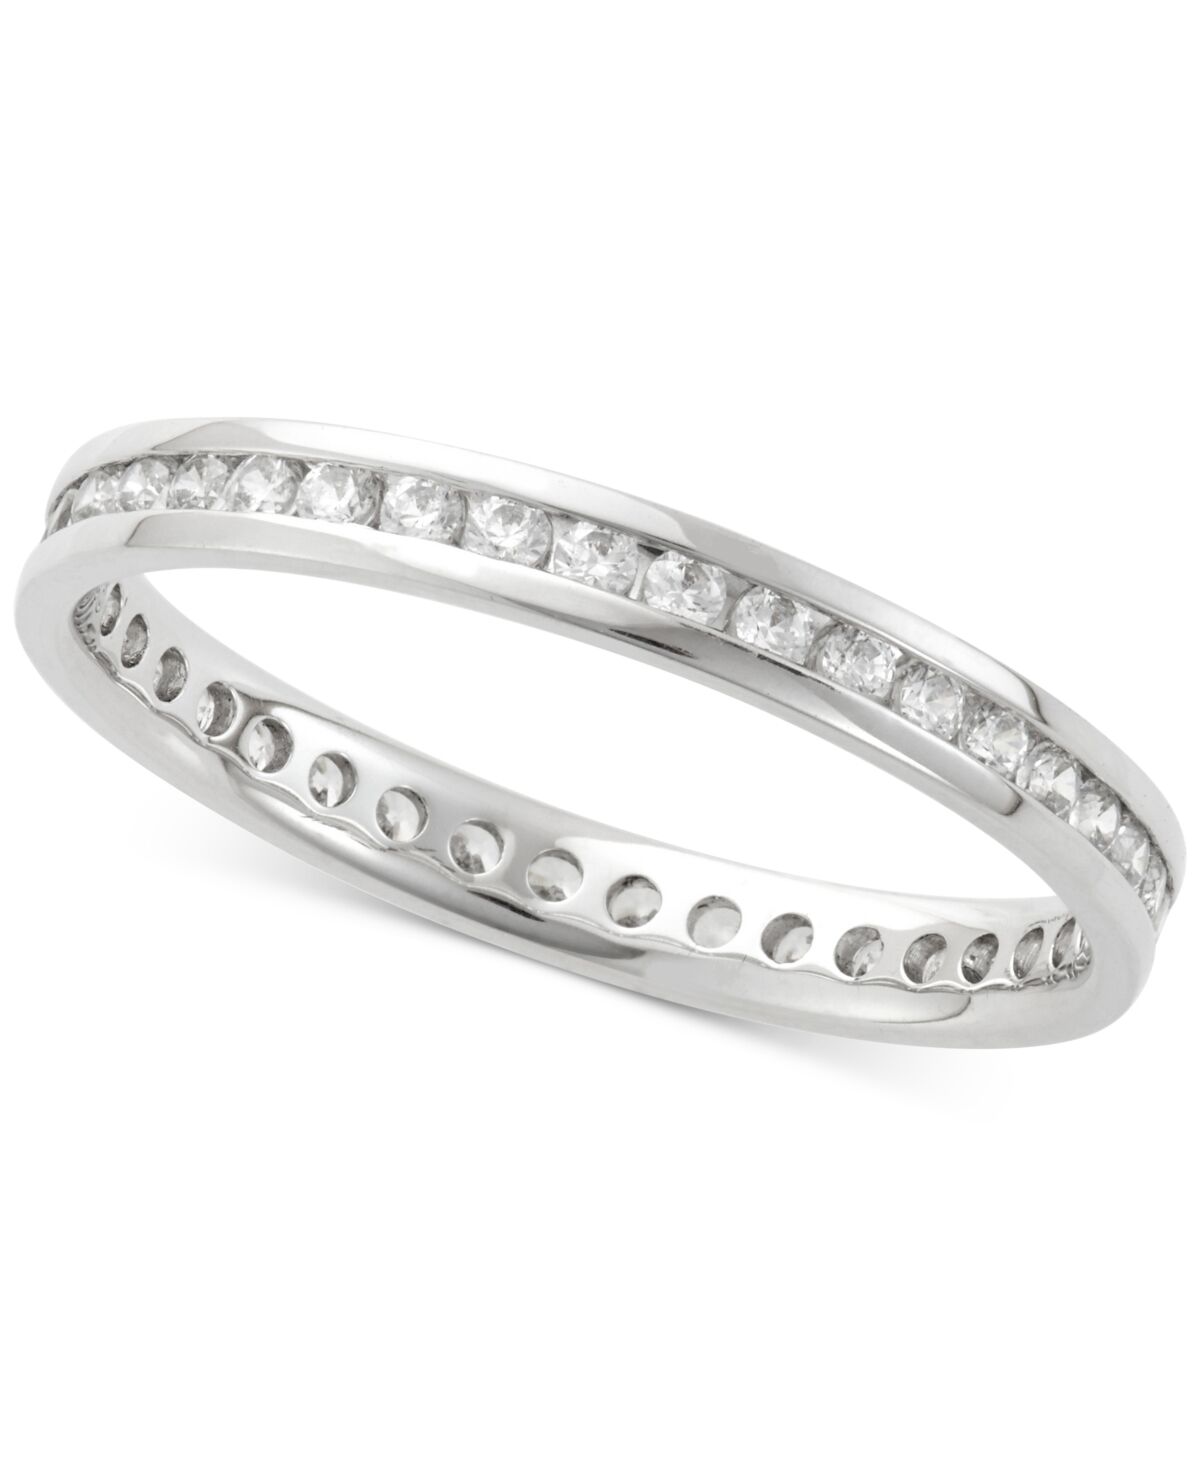 Macy's Diamond Channel Set Eternity Band (1/2 ct. t.w.) in 14k White Gold - White Gold